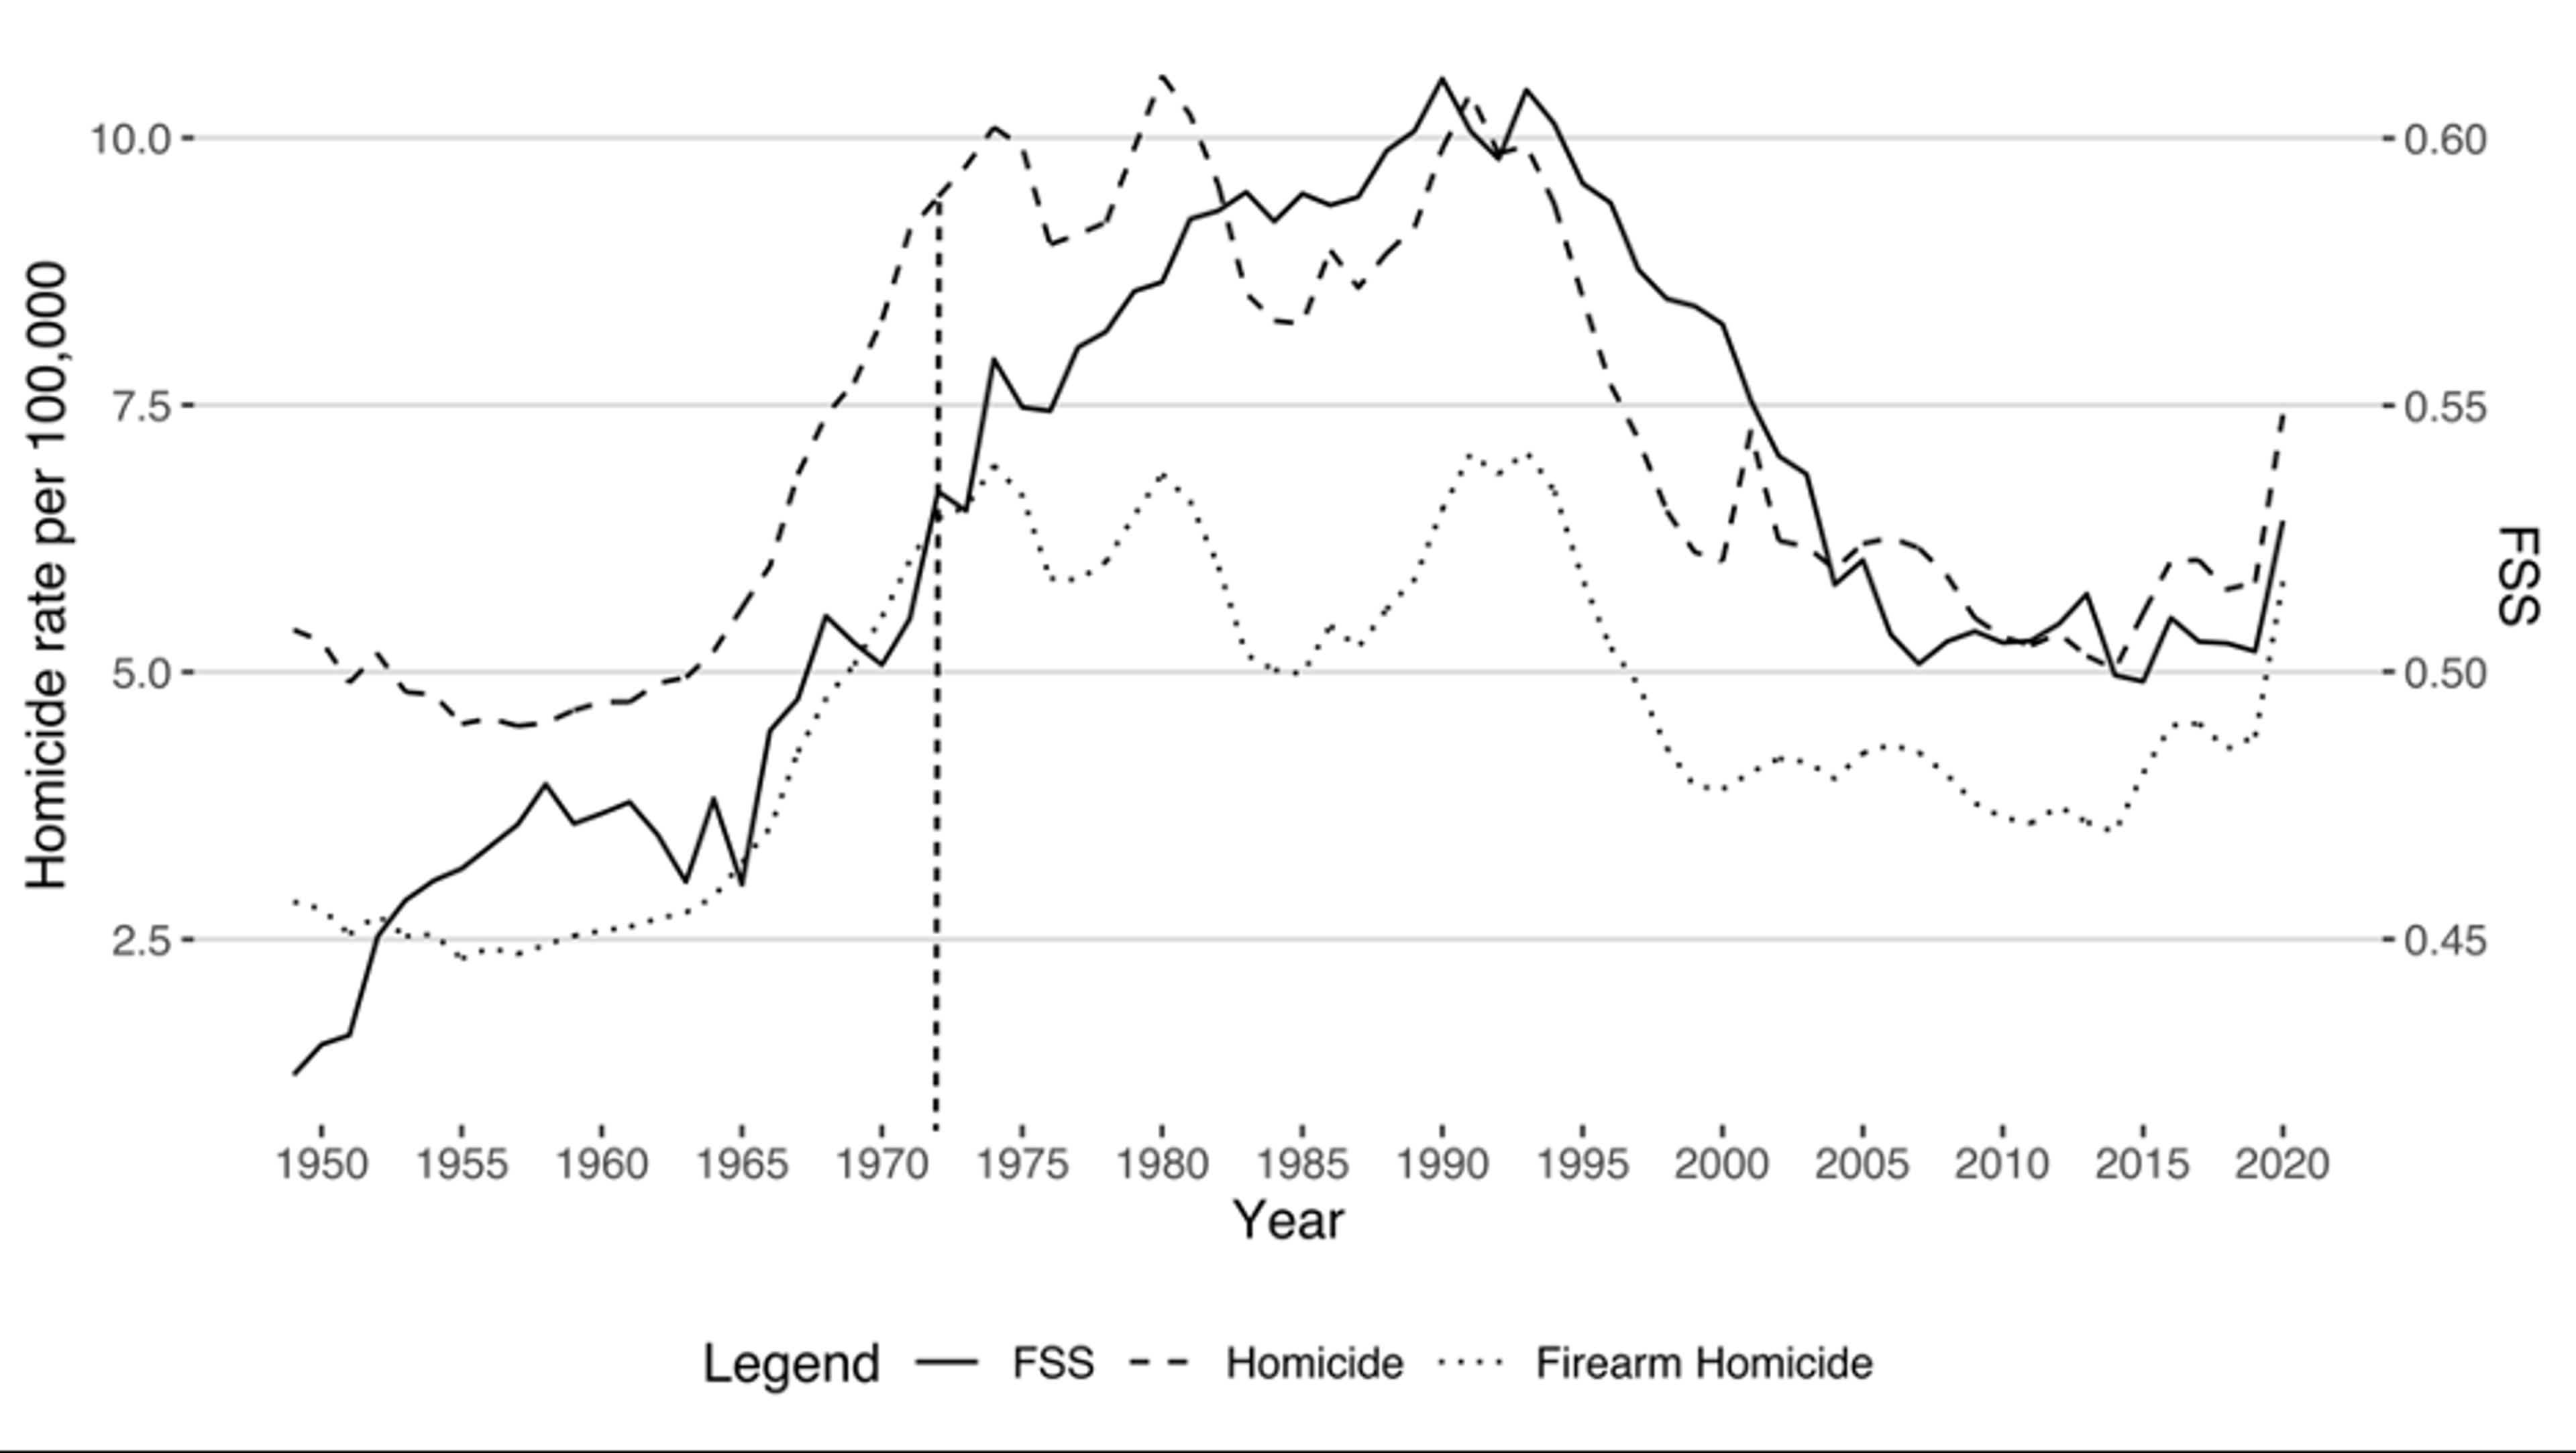 A line chart displays trends from 1950 to 2020 for homicide rates per 100,000 and FSS. Solid line represents FSS, dashed line for homicide rates, and dotted line for firearm homicide rates. Y-axes show homicide rate (left) and FSS (right). Legend indicates line styles.